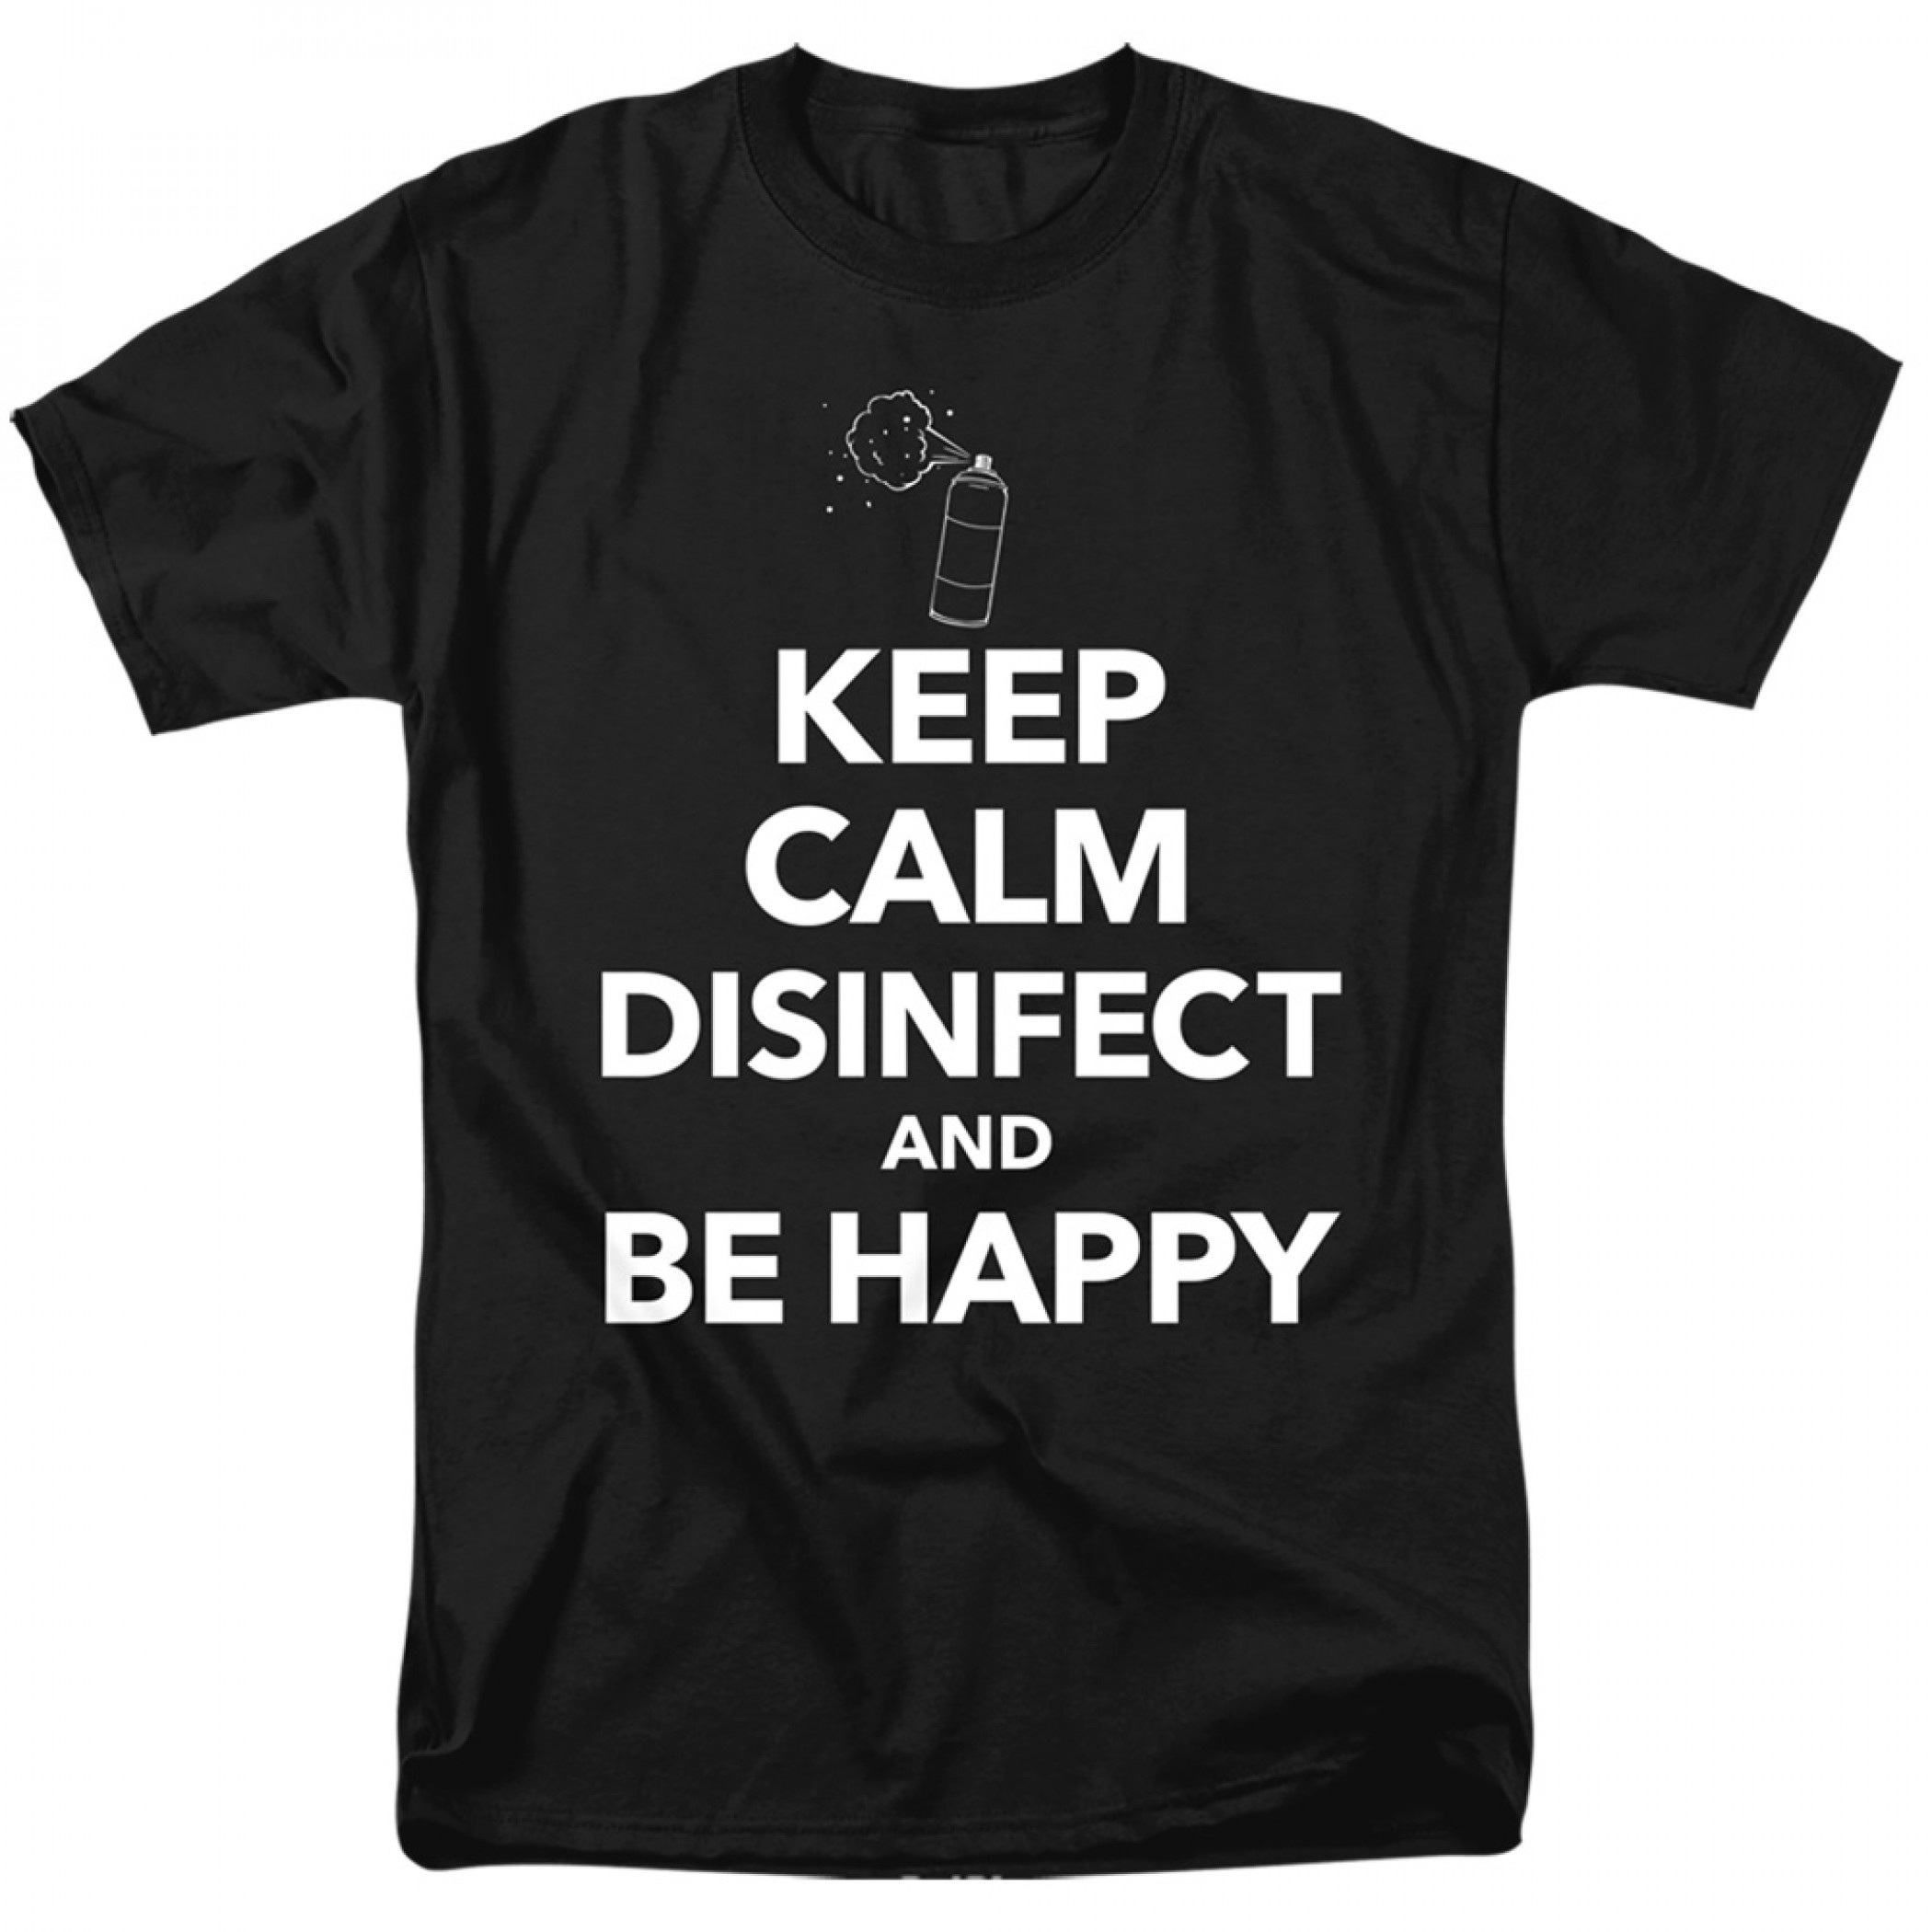 Keep Calm and Disinfect Social Distancing Men's T-Shirt